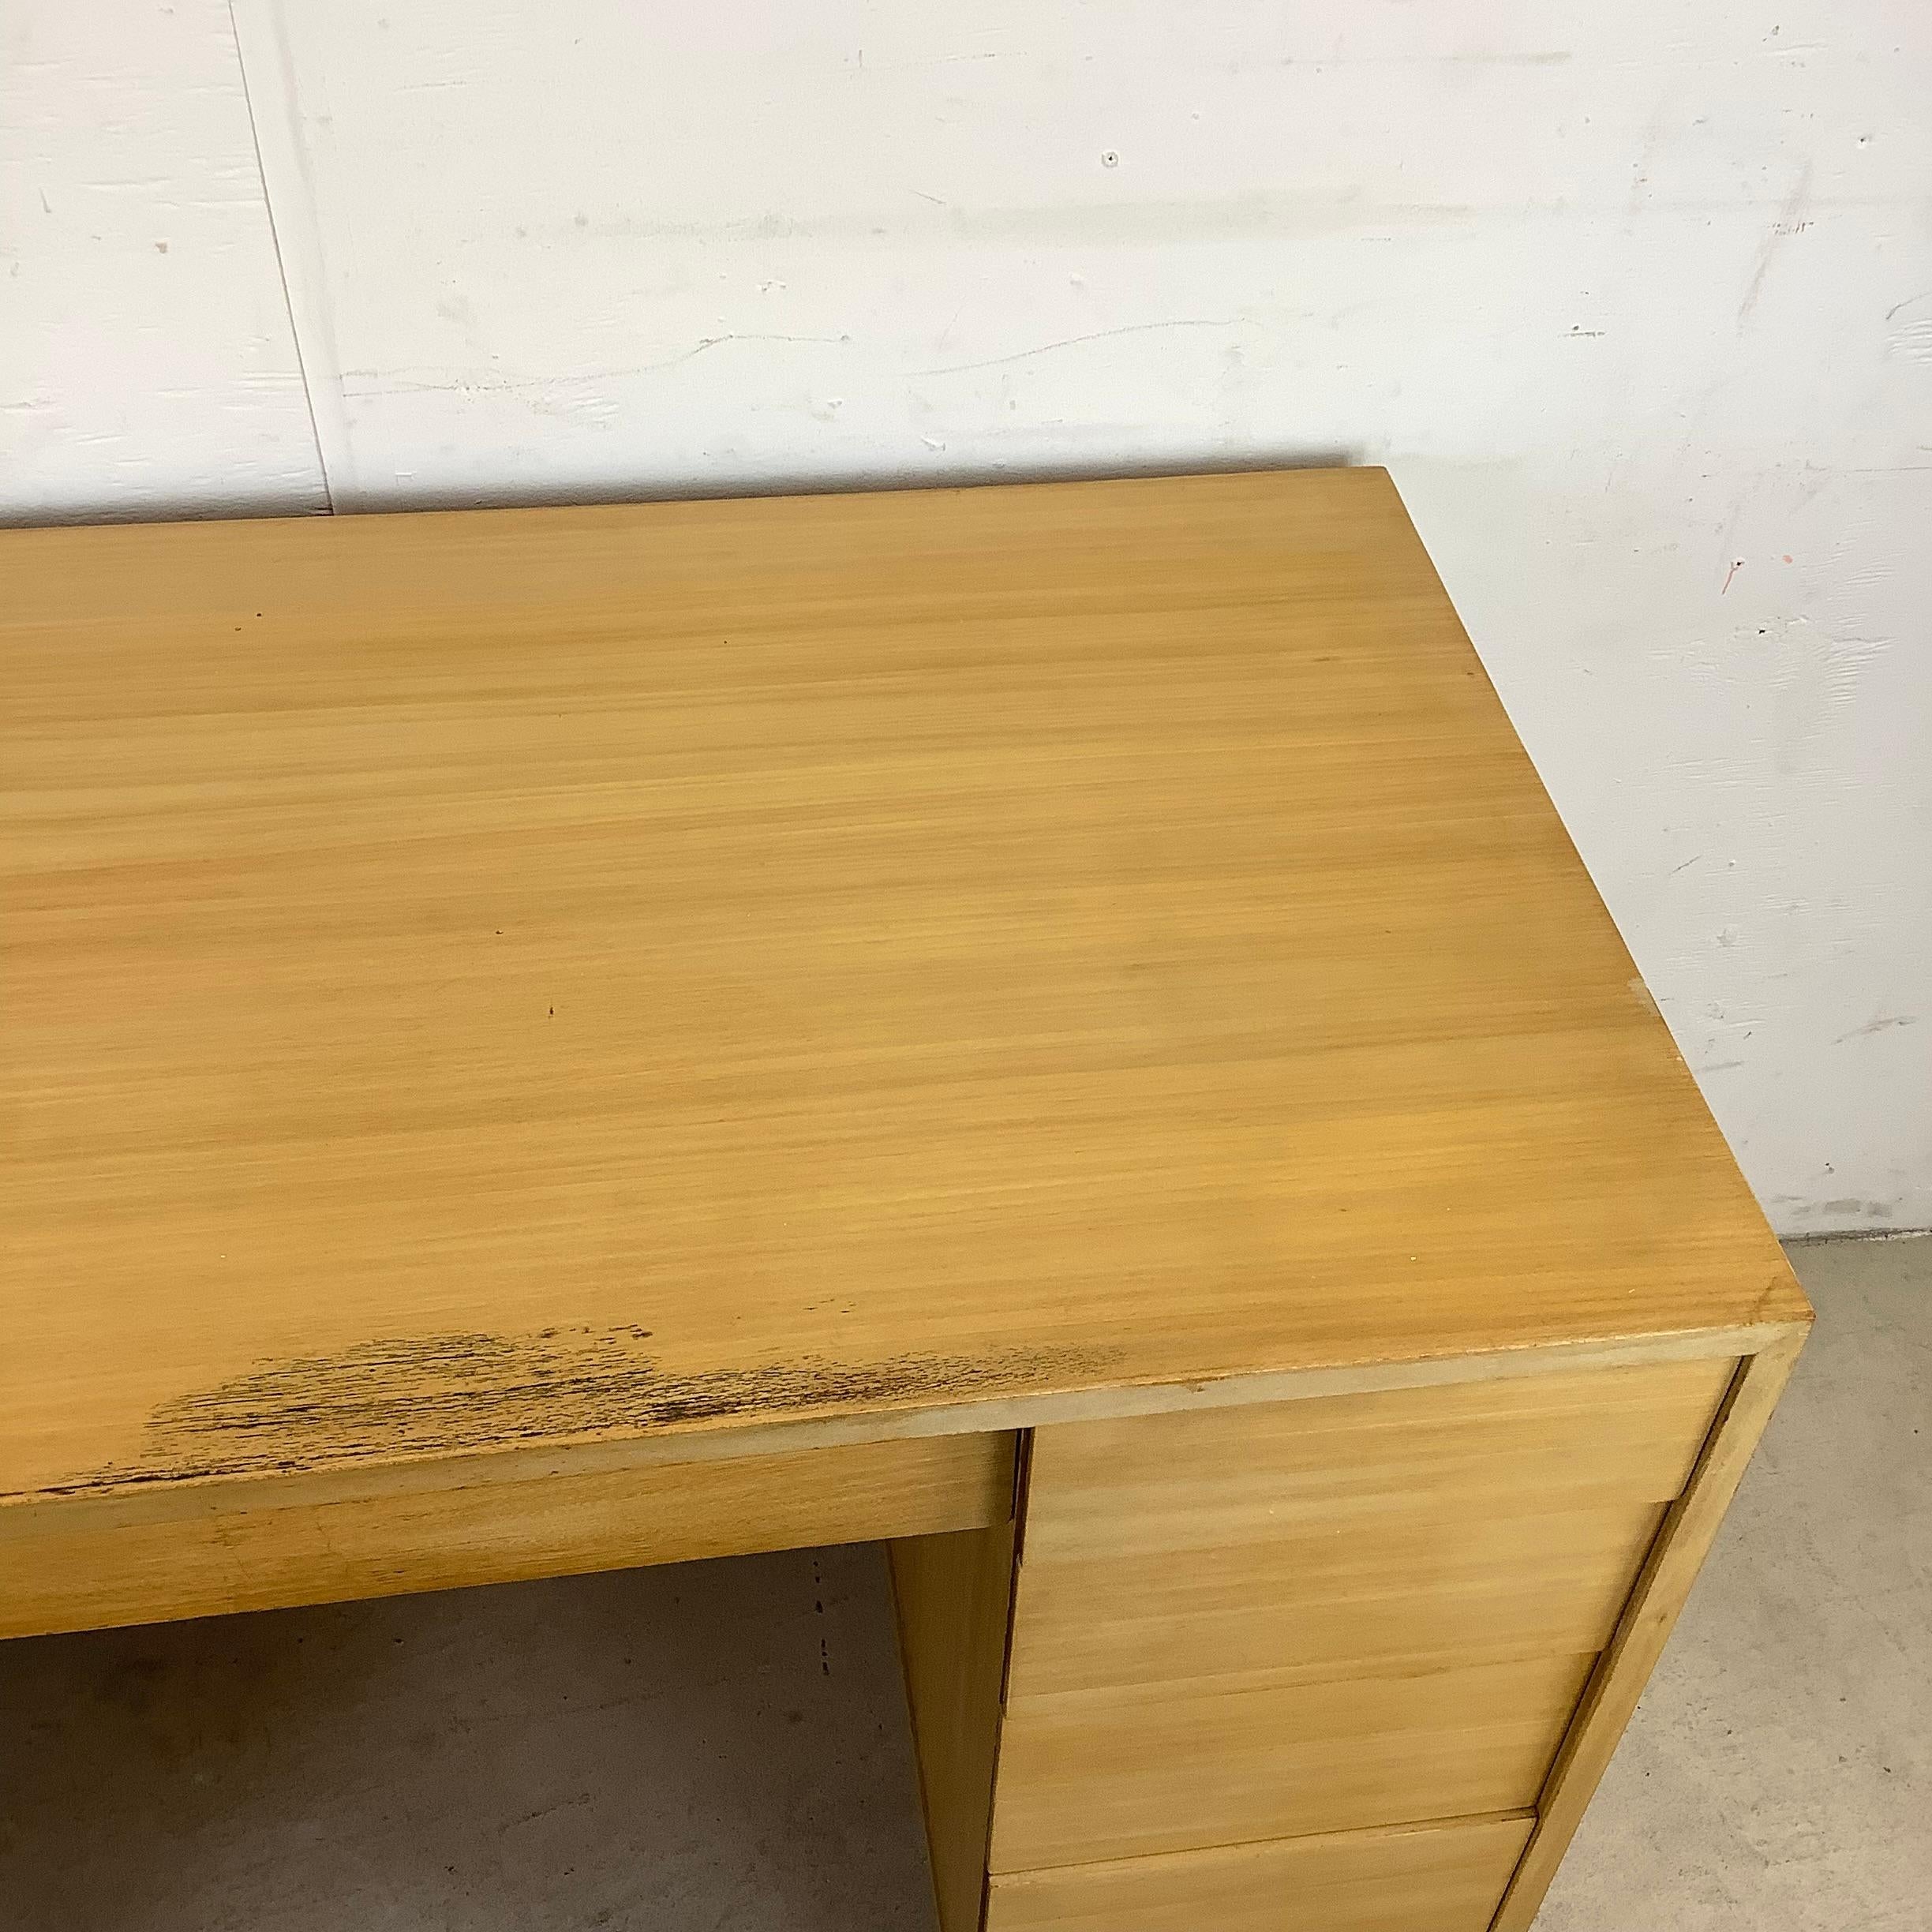 Other Midcentury Desk by Edward Wormley for Drexel